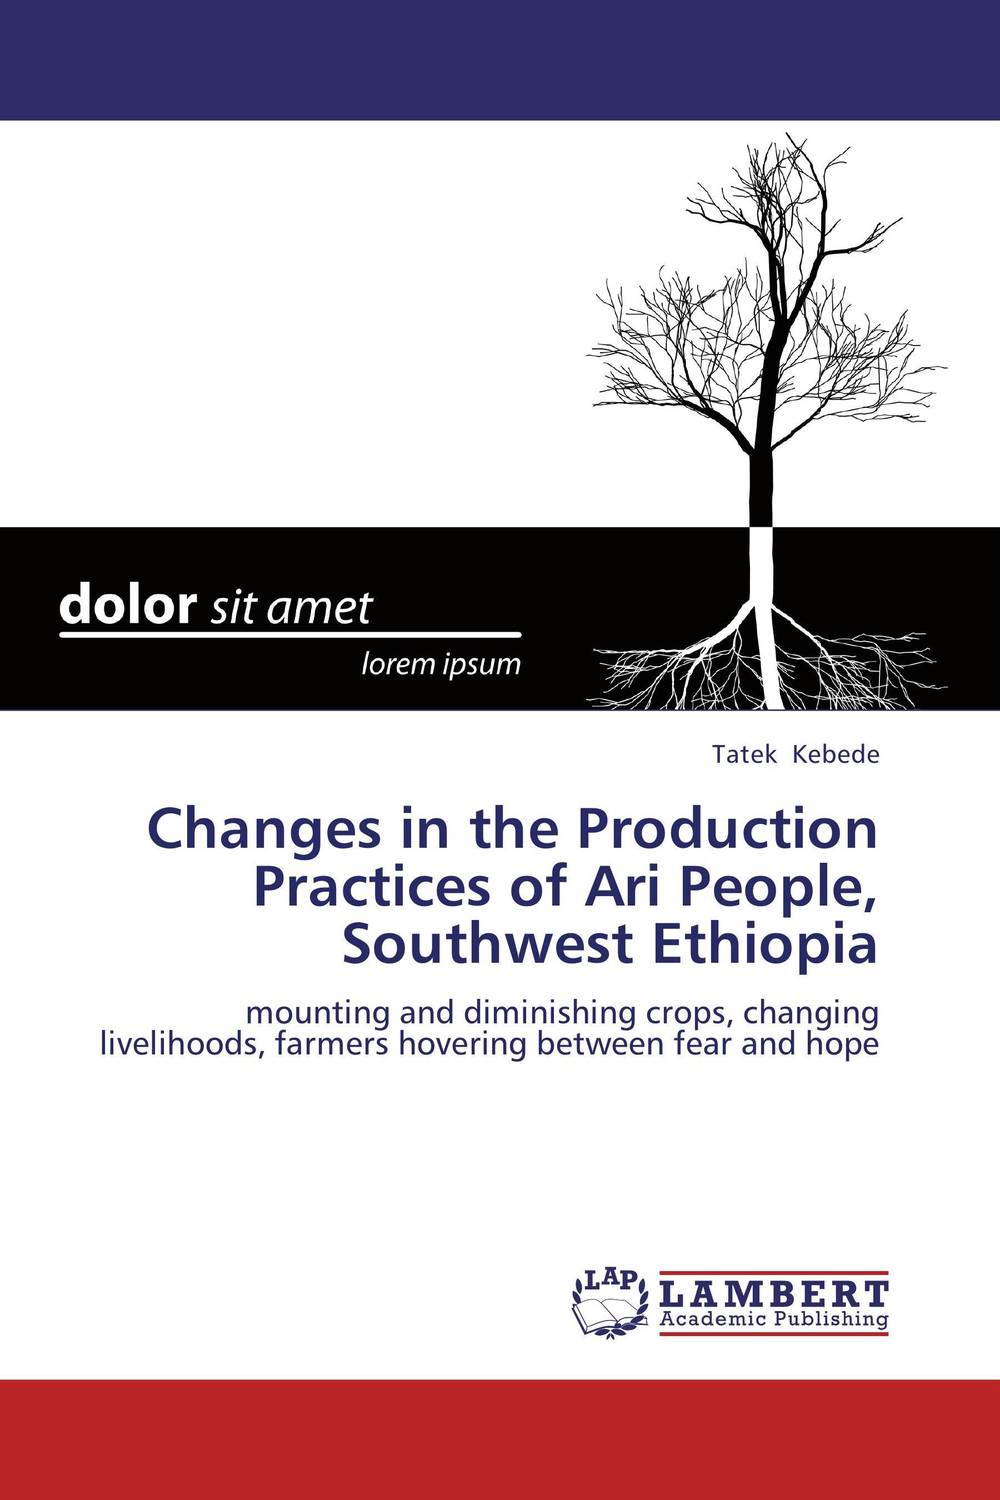 Changes in the Production Practices of Ari People, Southwest Ethiopia